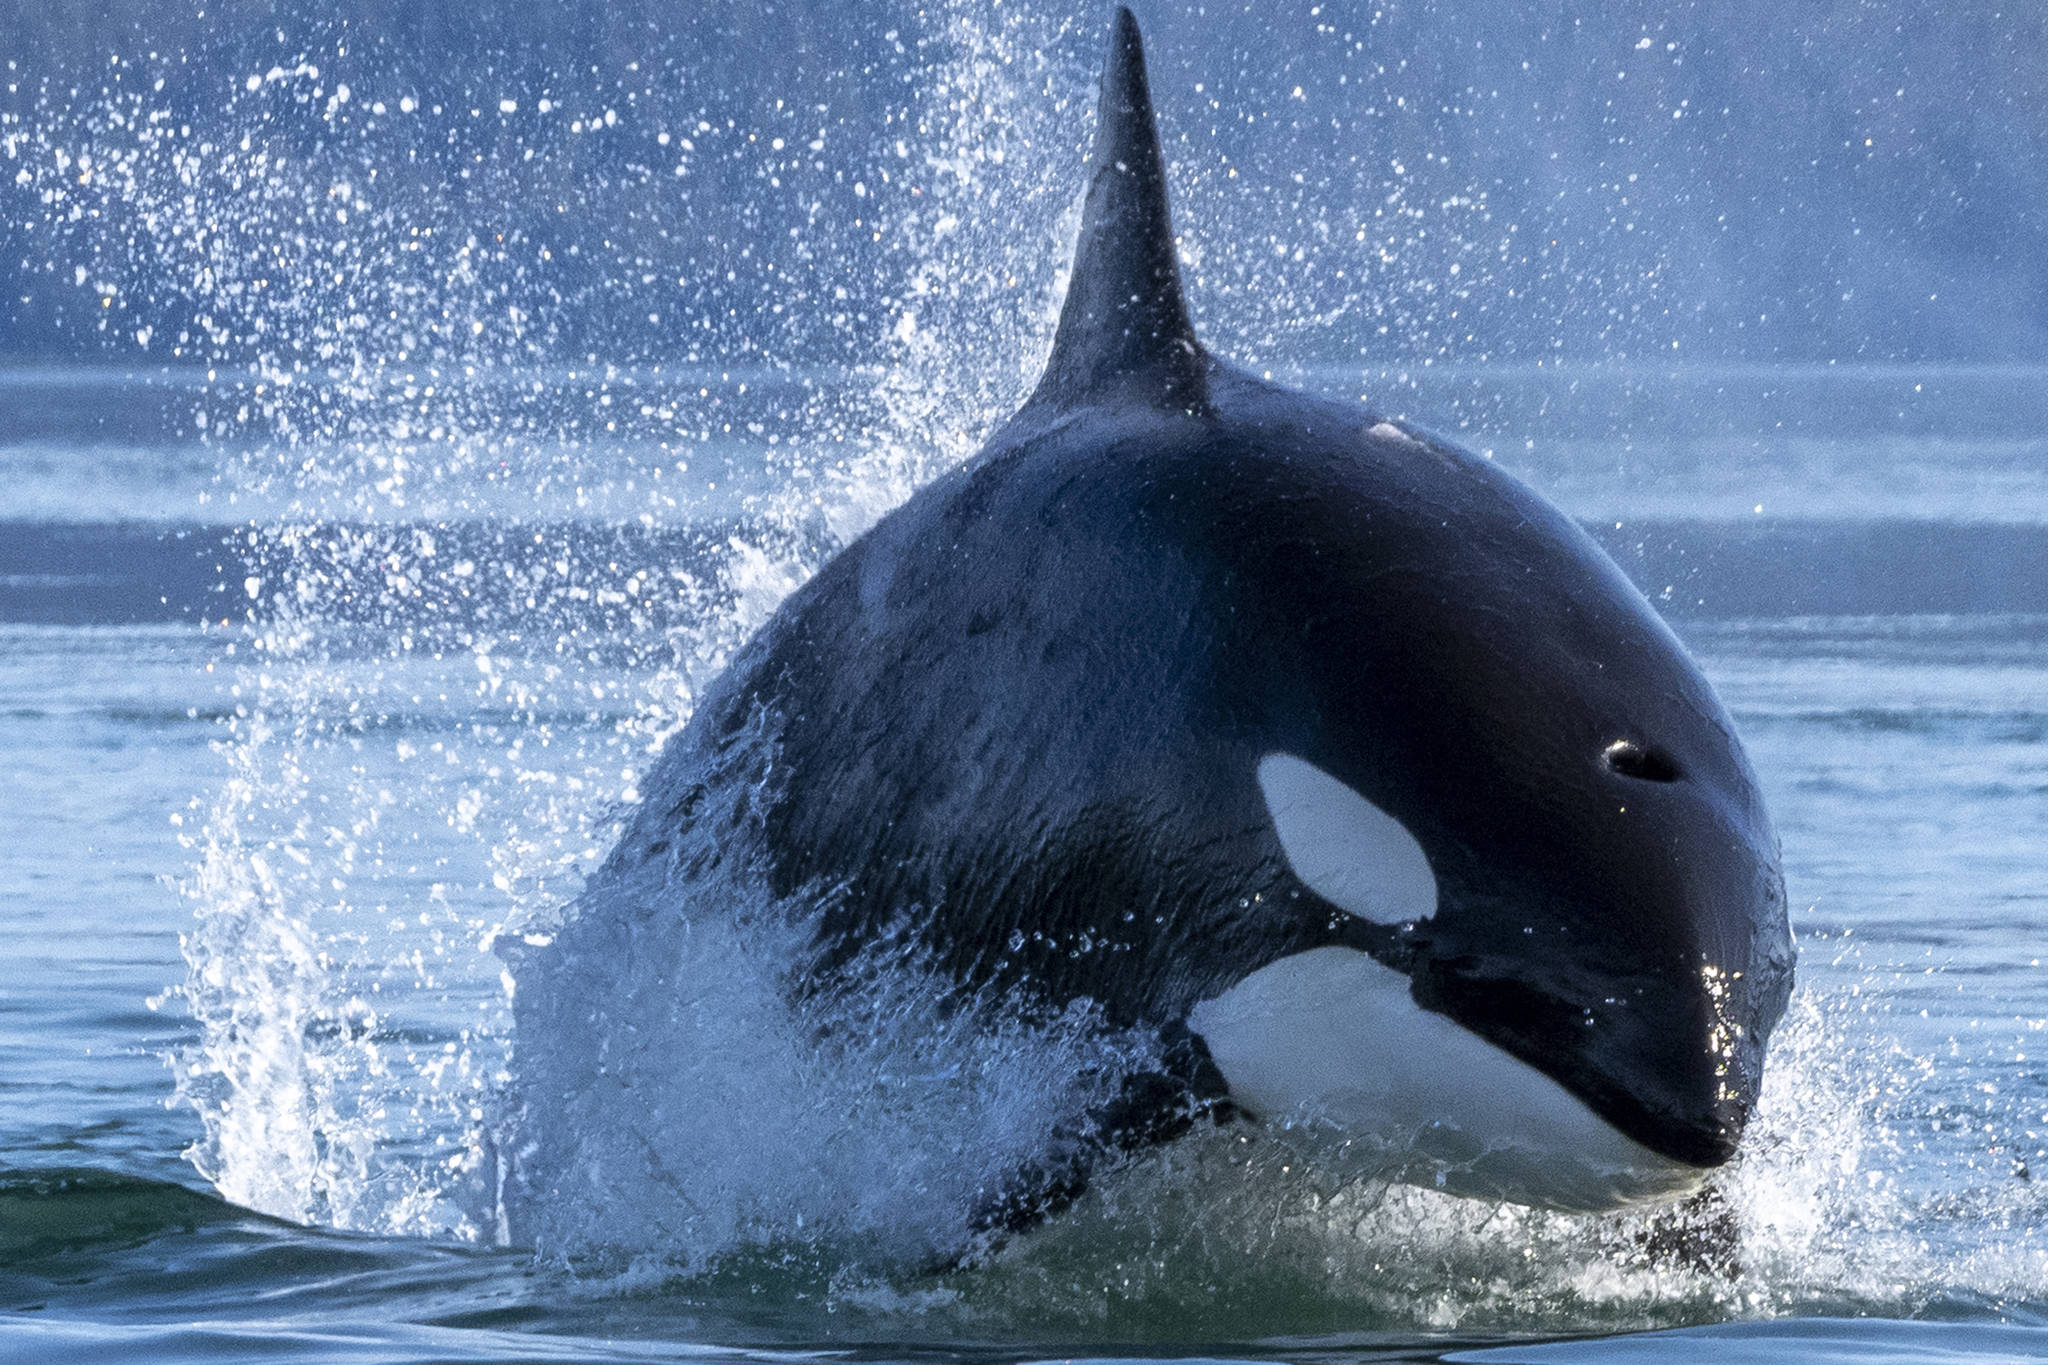 An orca emerges from the water near Hoonah. Whale activity was a major source of inspiration for a recently painted mural at Icy Strait Point. (Courtesy Photo | Icy Strait Point)